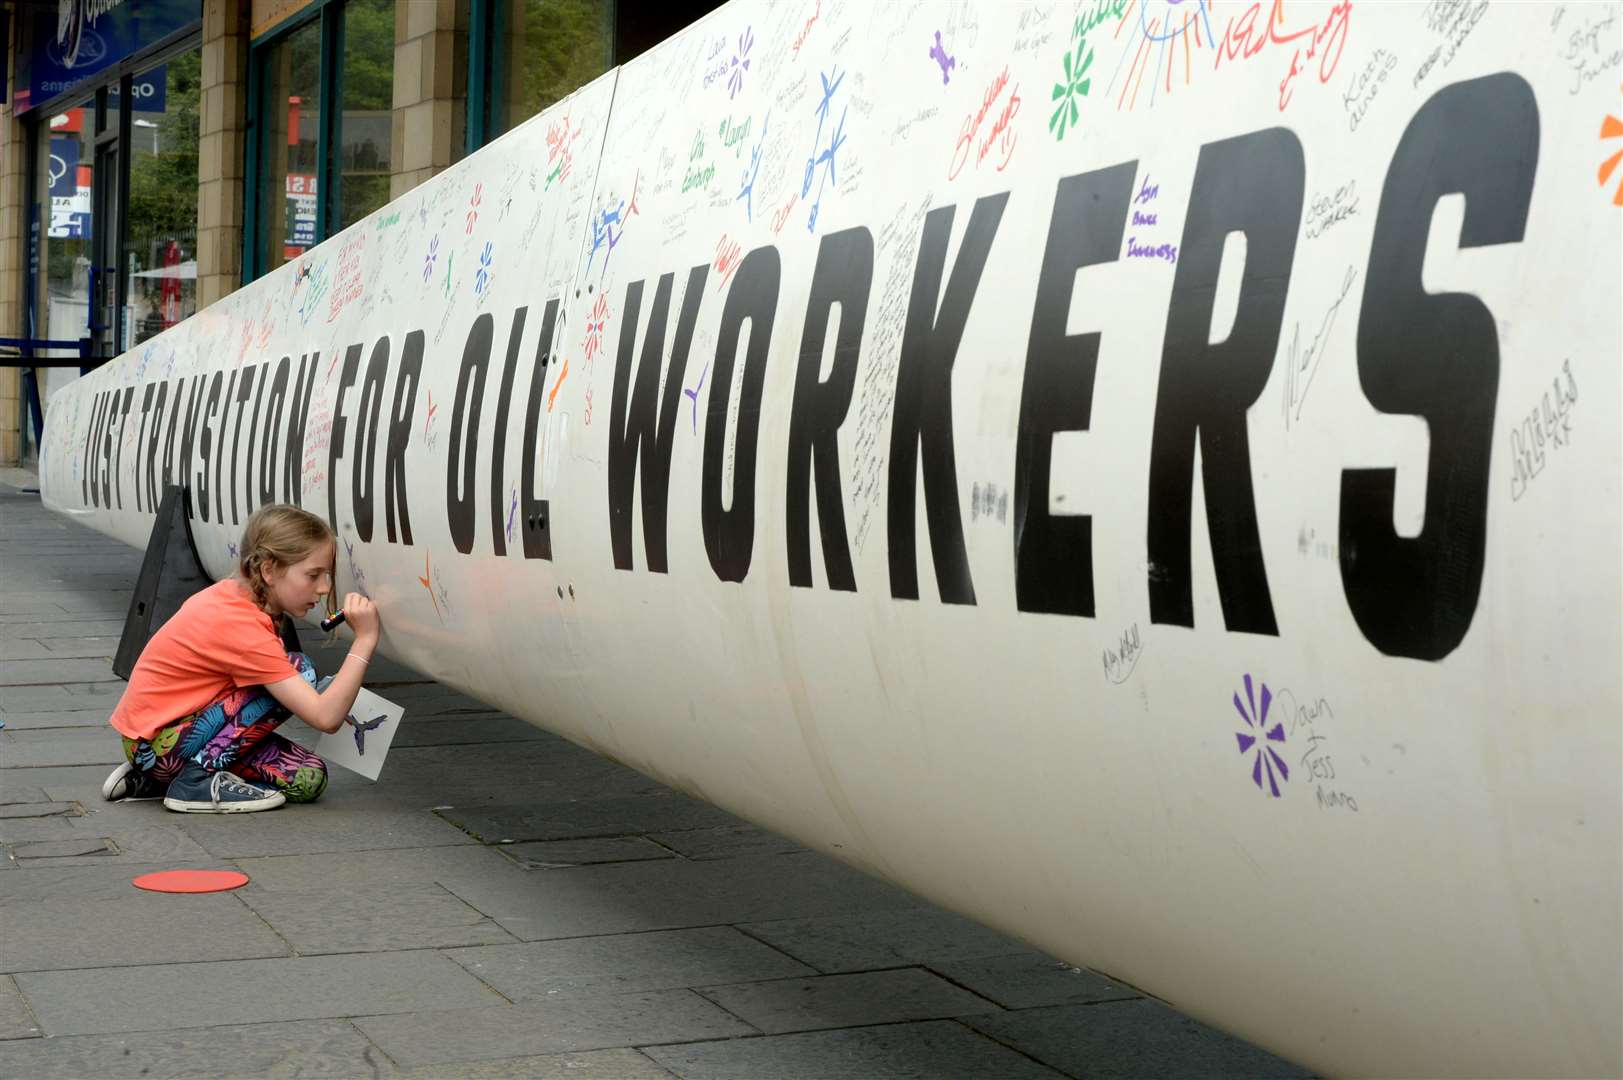 Greenpeace station a 13ft wind turbine blade outside the Eastgate centre as part of pressure on Nicola Sturgeon regarding the transition from oil and gas to renewables: Jane Mackenzie (8) adding her signature to the wind turbine blade. Picture: James Mackenzie